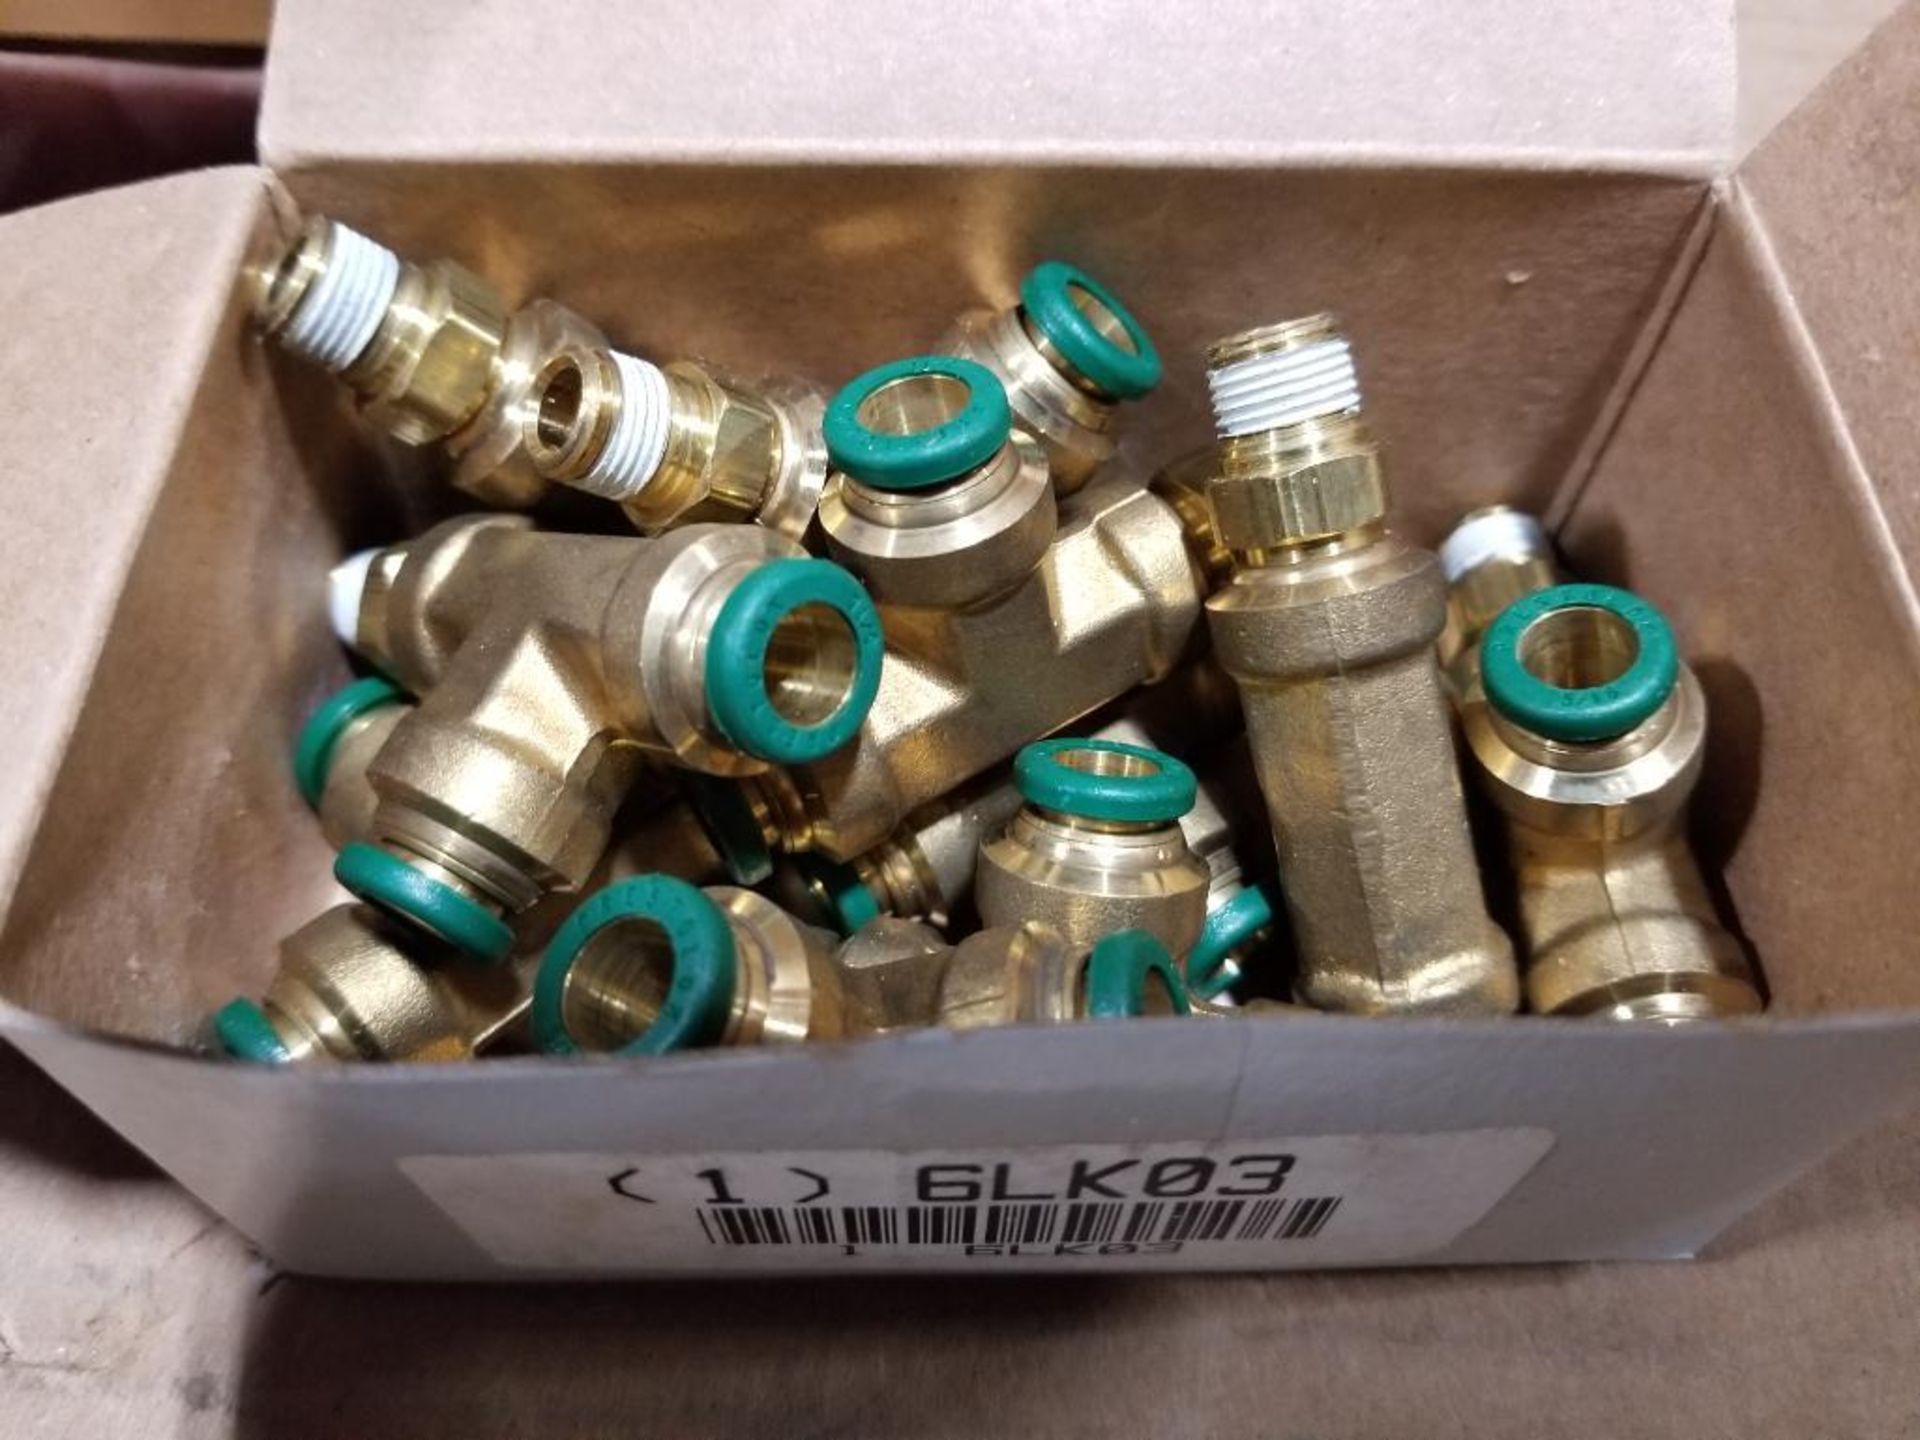 Qty 250 - Parker brass fittings. Part number 6LK15. 25 boxes of 10.